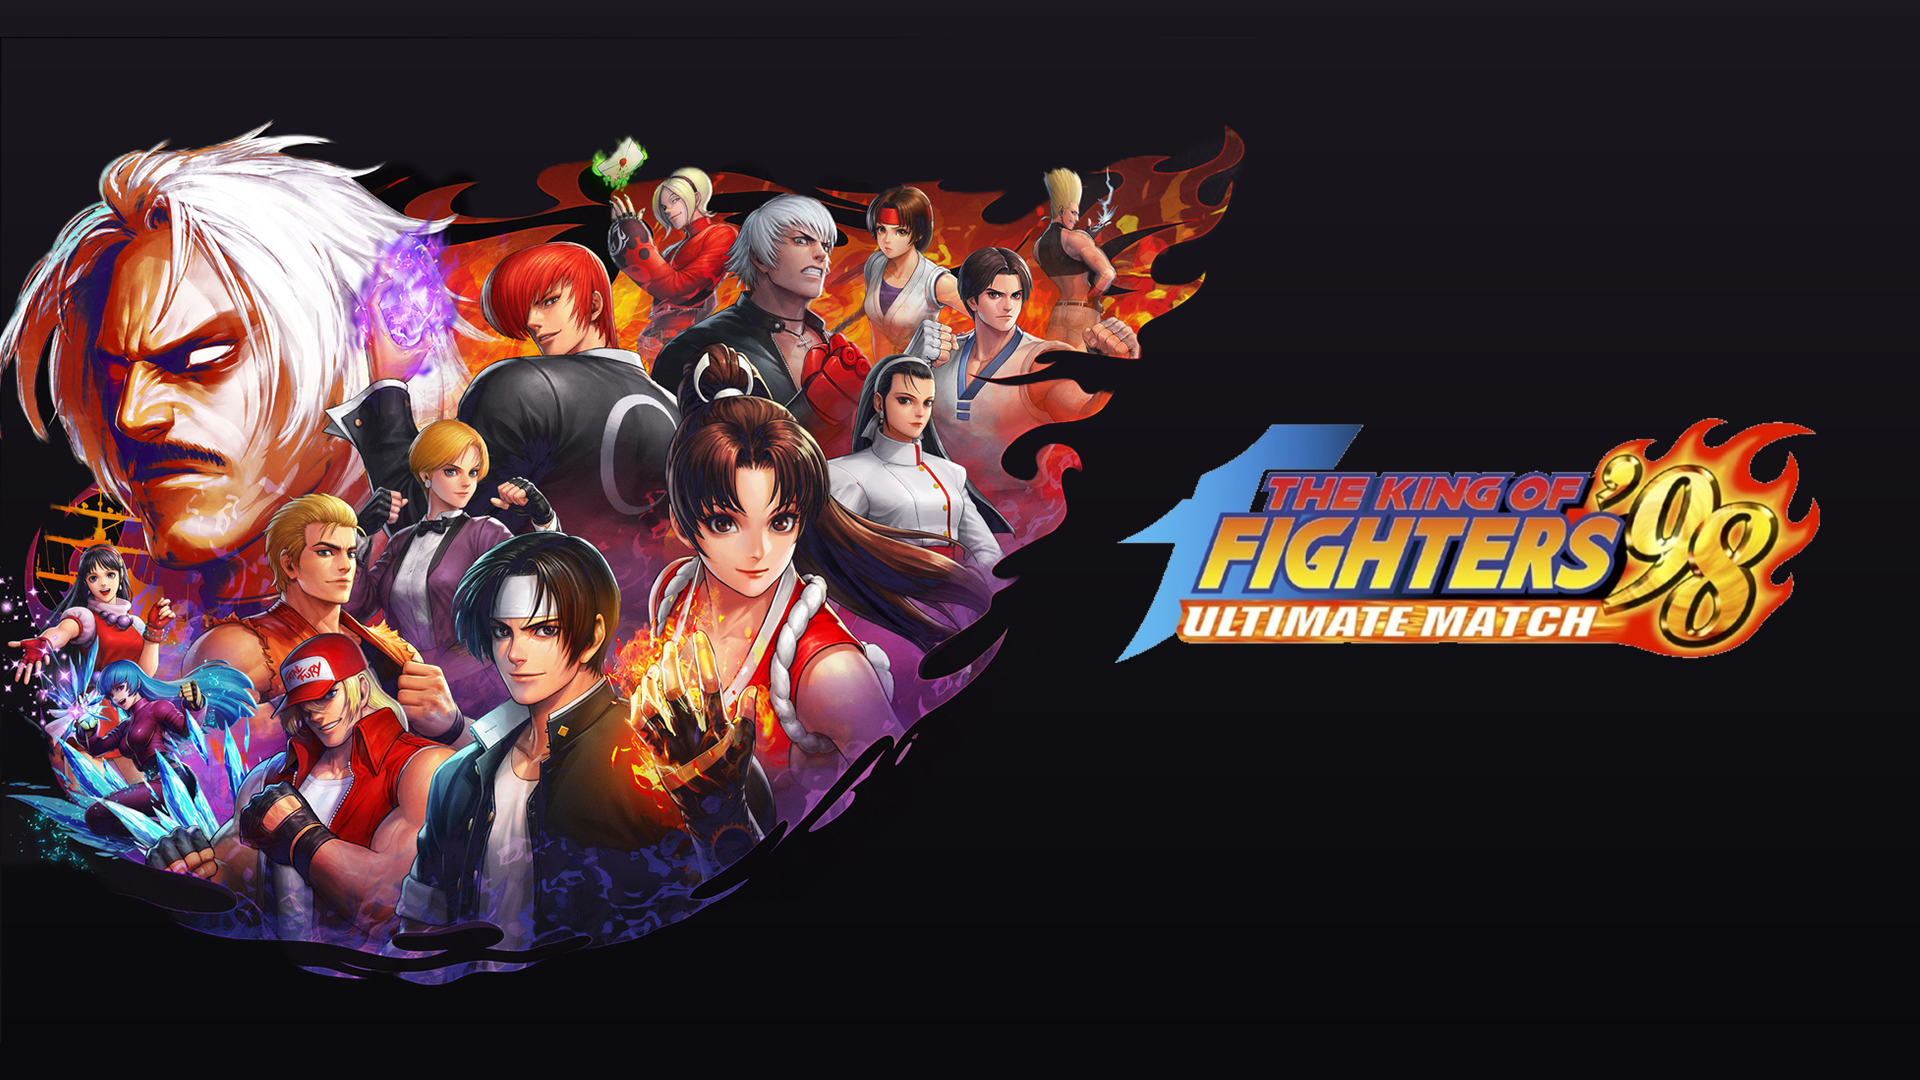 the king of fighters 98 artwork